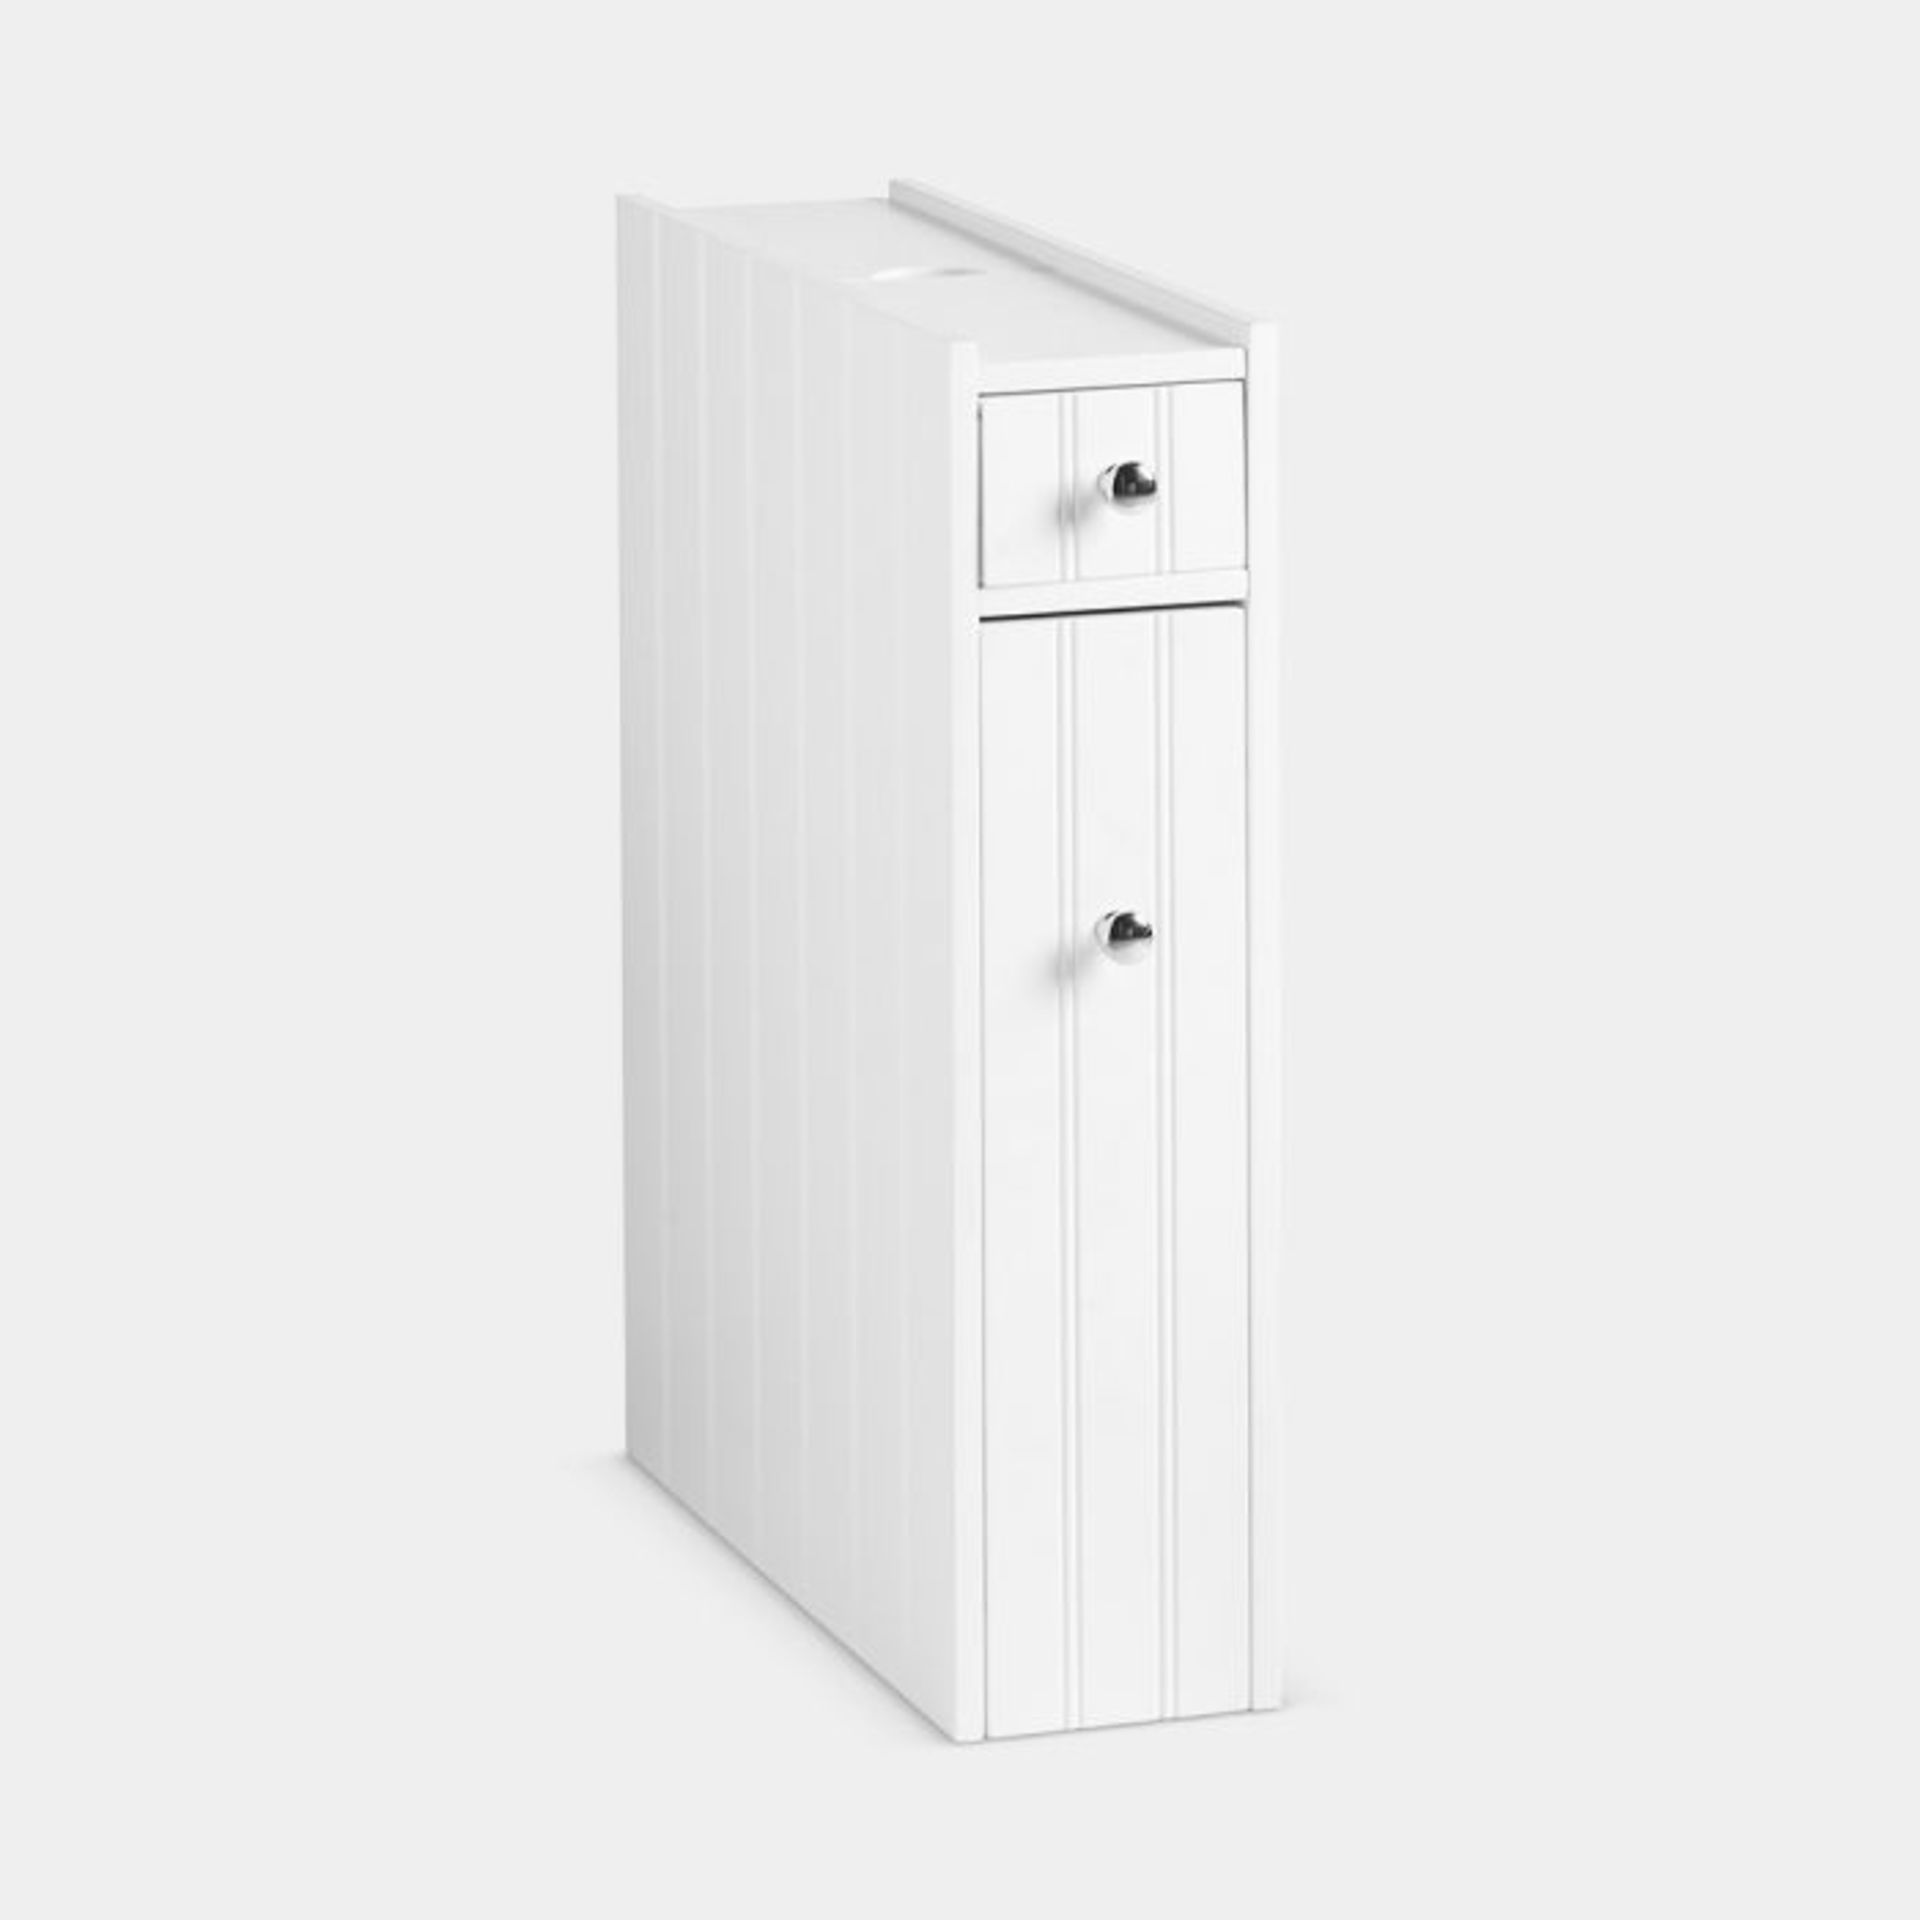 Holbrook White Slim Bathroom Storage Unit. - PW. If you’d like more storage in your bathroom but